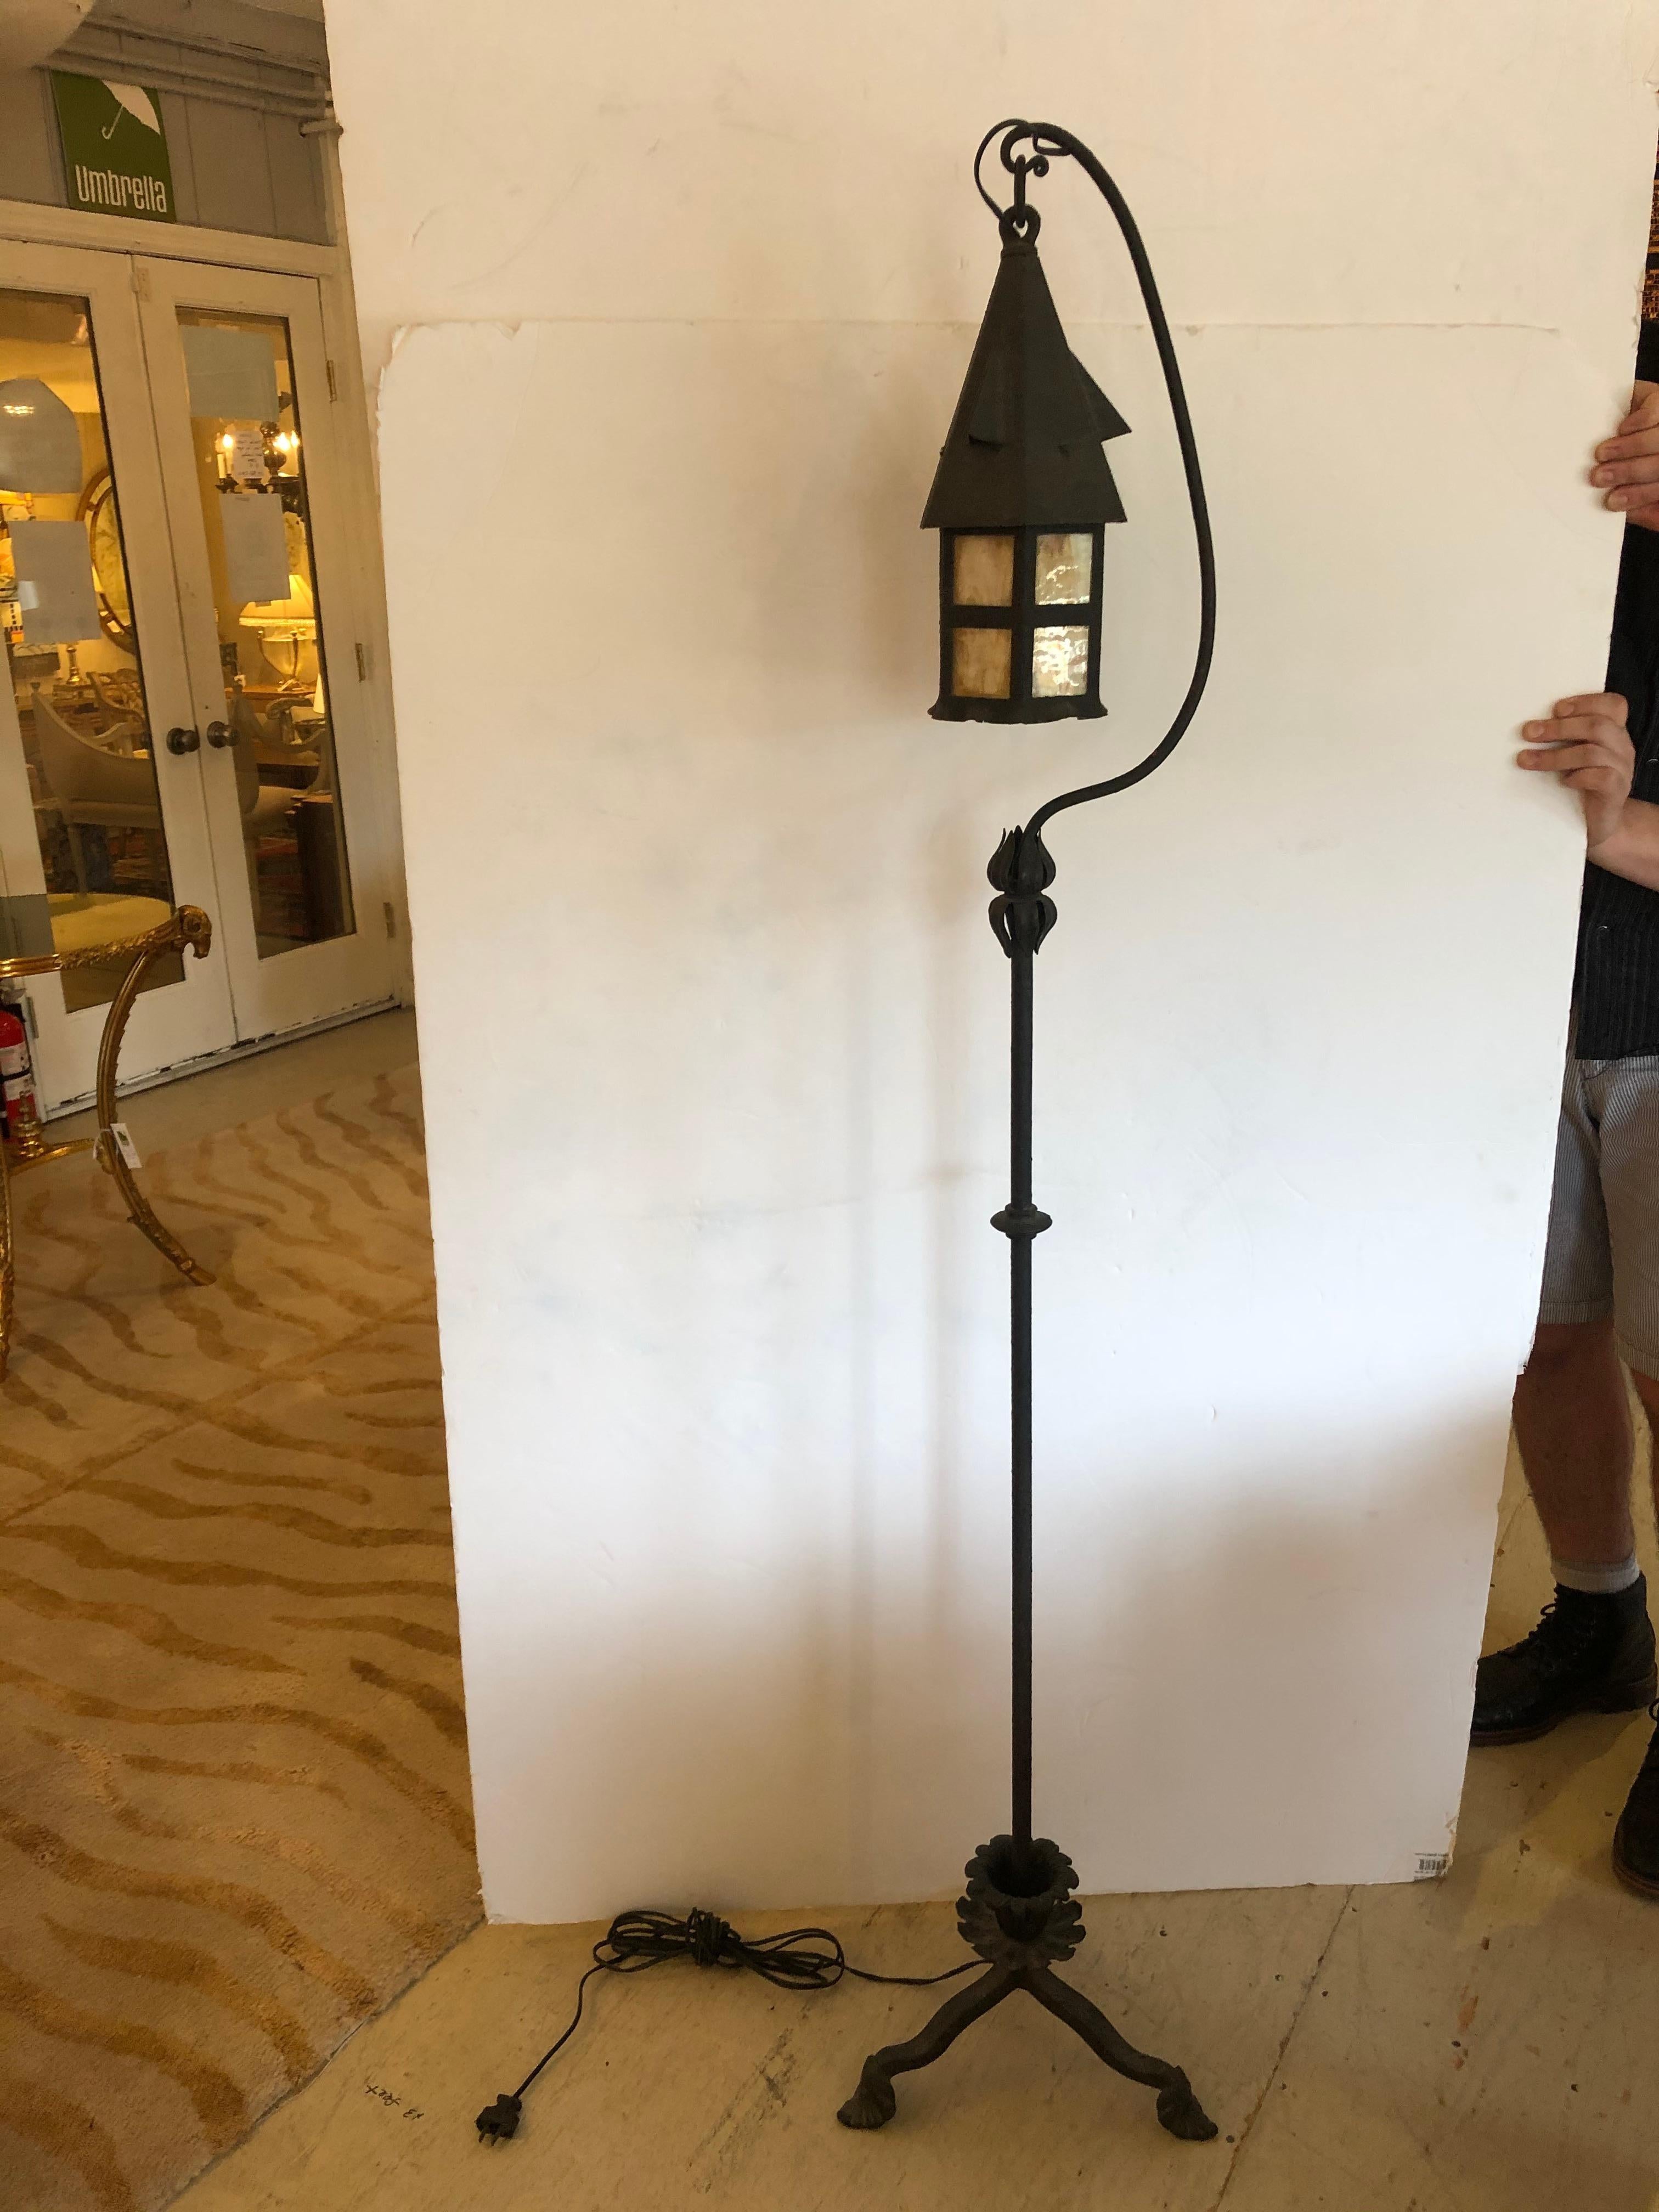 mission style floor lamps